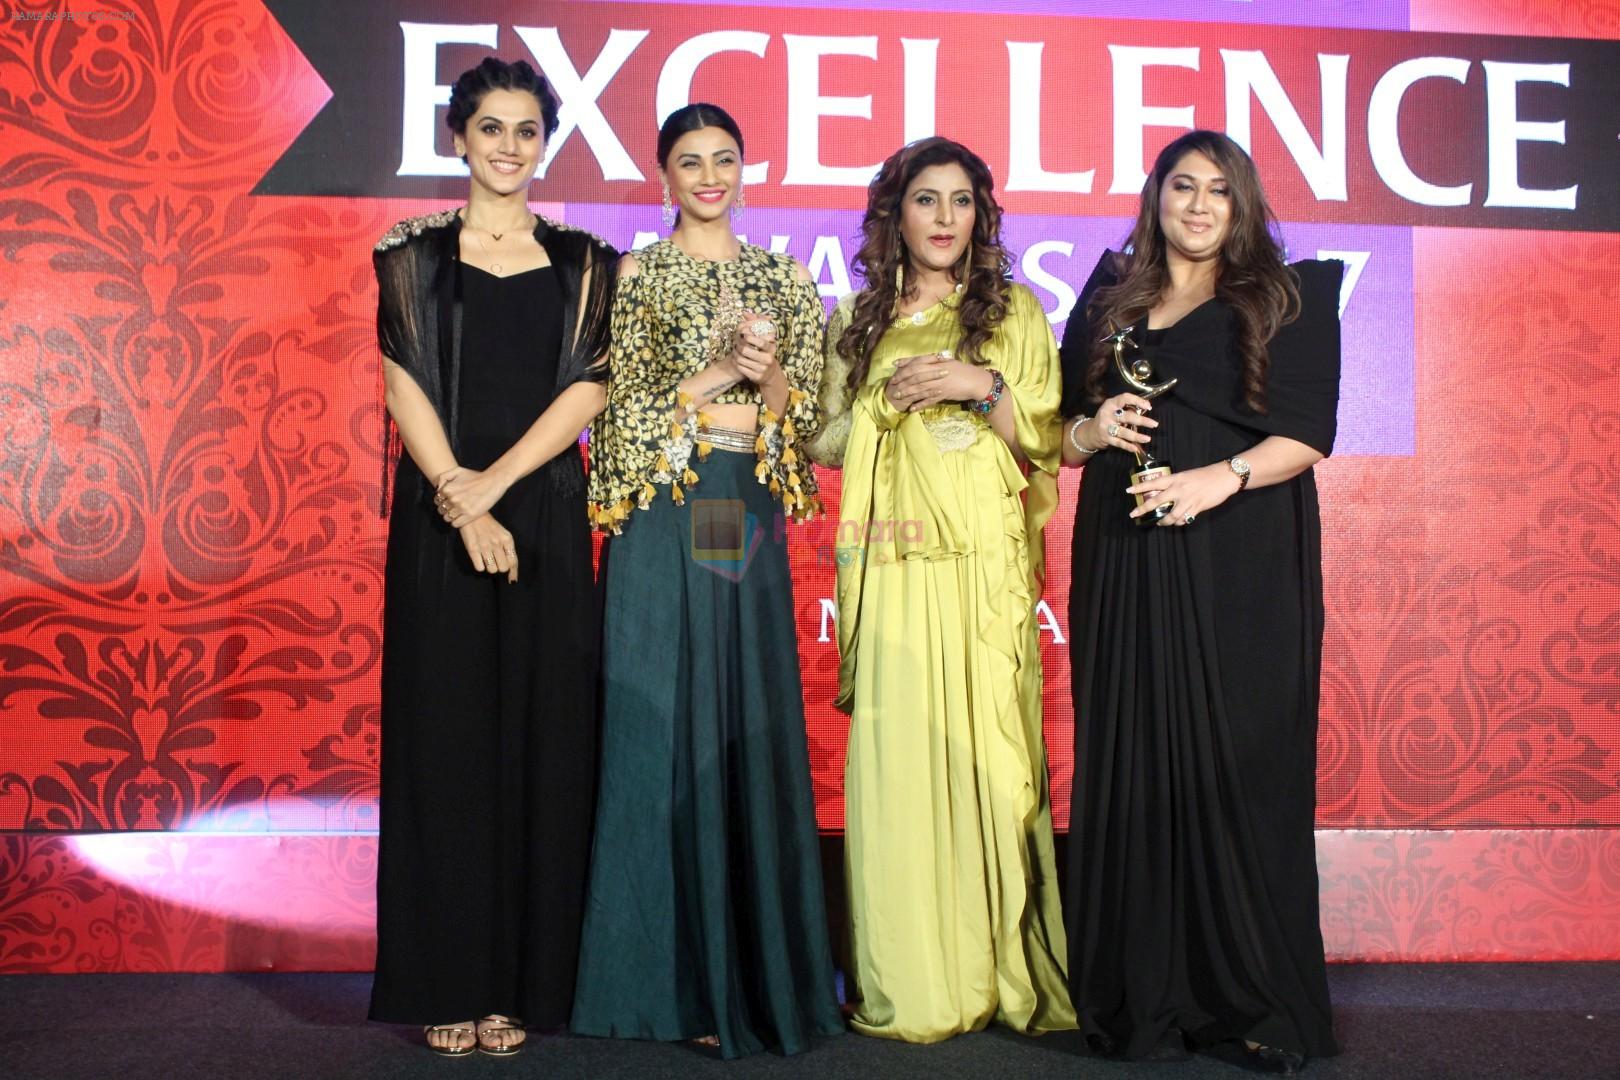 Taapsee Pannu, Daisy Shah At SAVVY Excellence Award on 21st Aug 2017